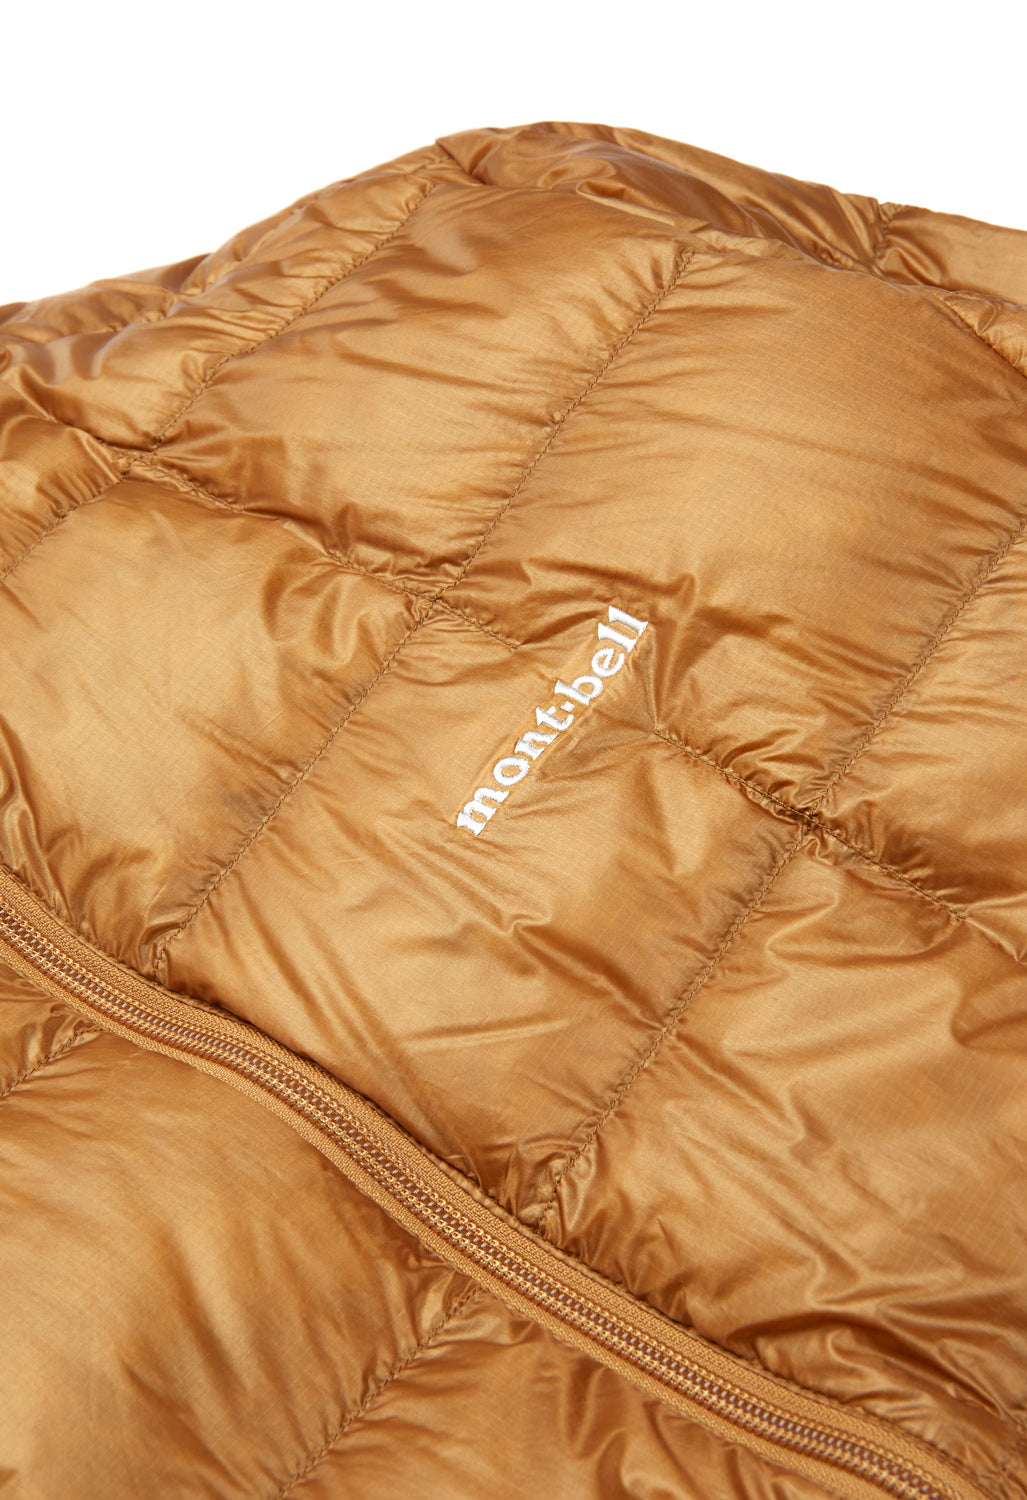 Montbell Men's Superior Down Jacket - Brown